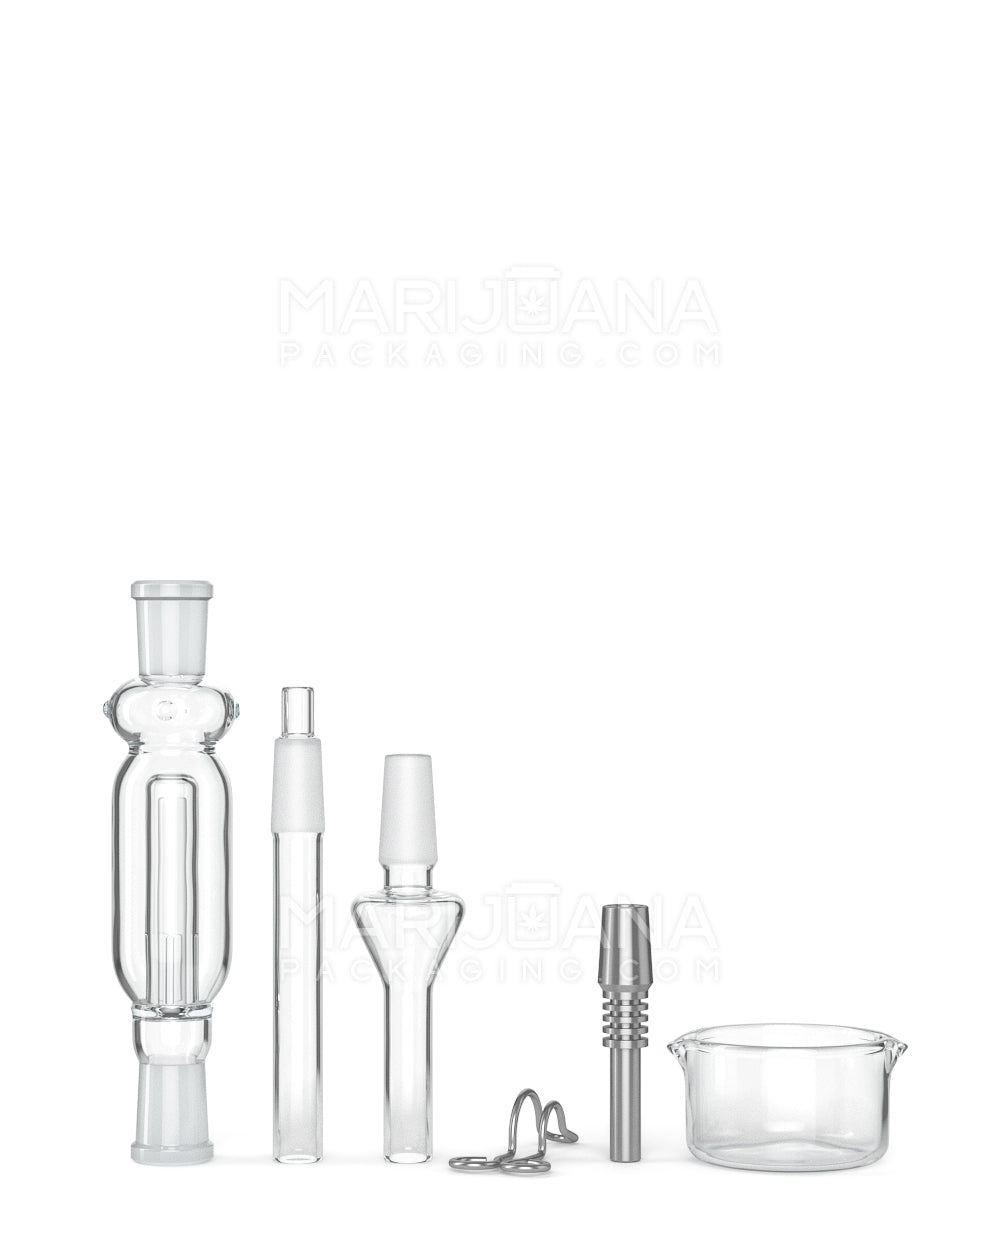 5 Assorted Stainless Steel Dabber w/ Silicone Tip